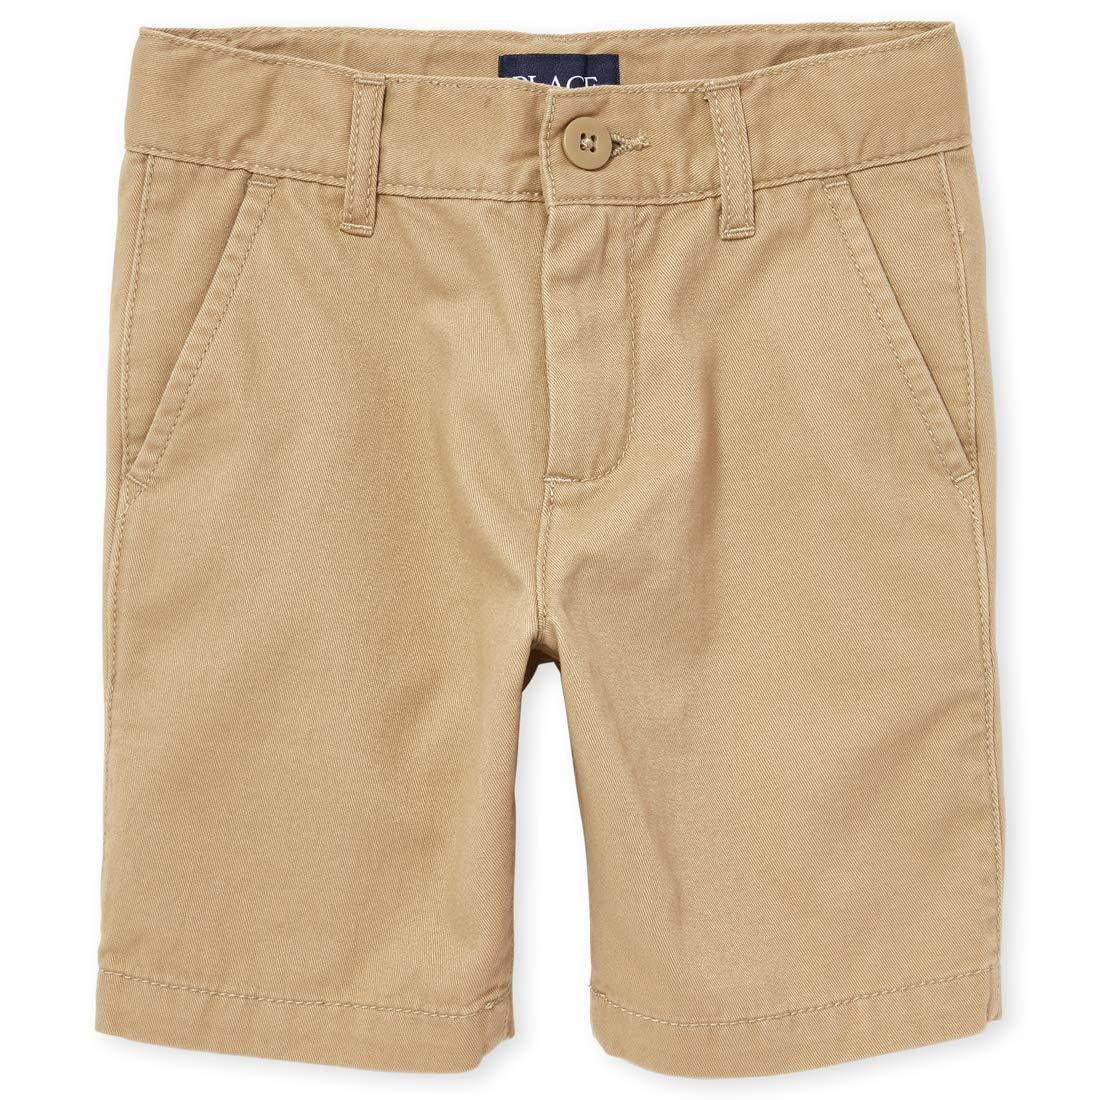 The Childrens Place boys Stretch Chino Shorts 